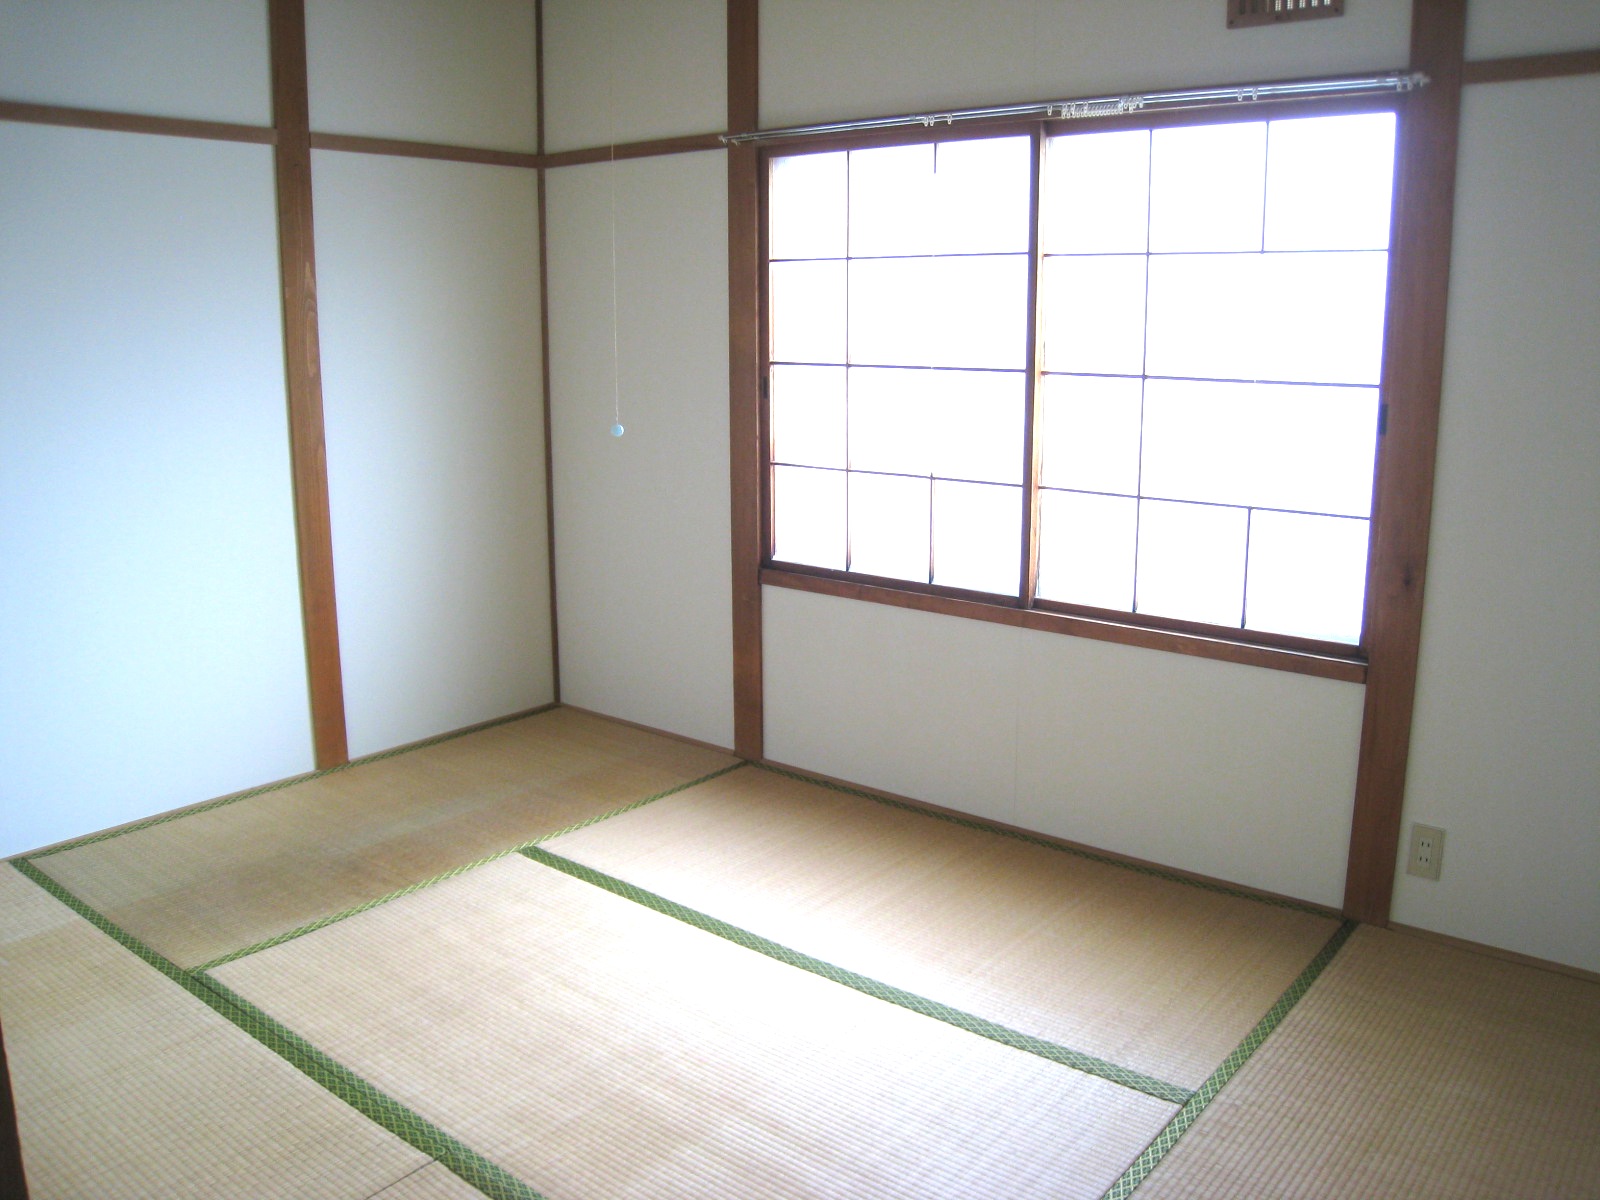 Other room space. Japanese-style room also has been decorated